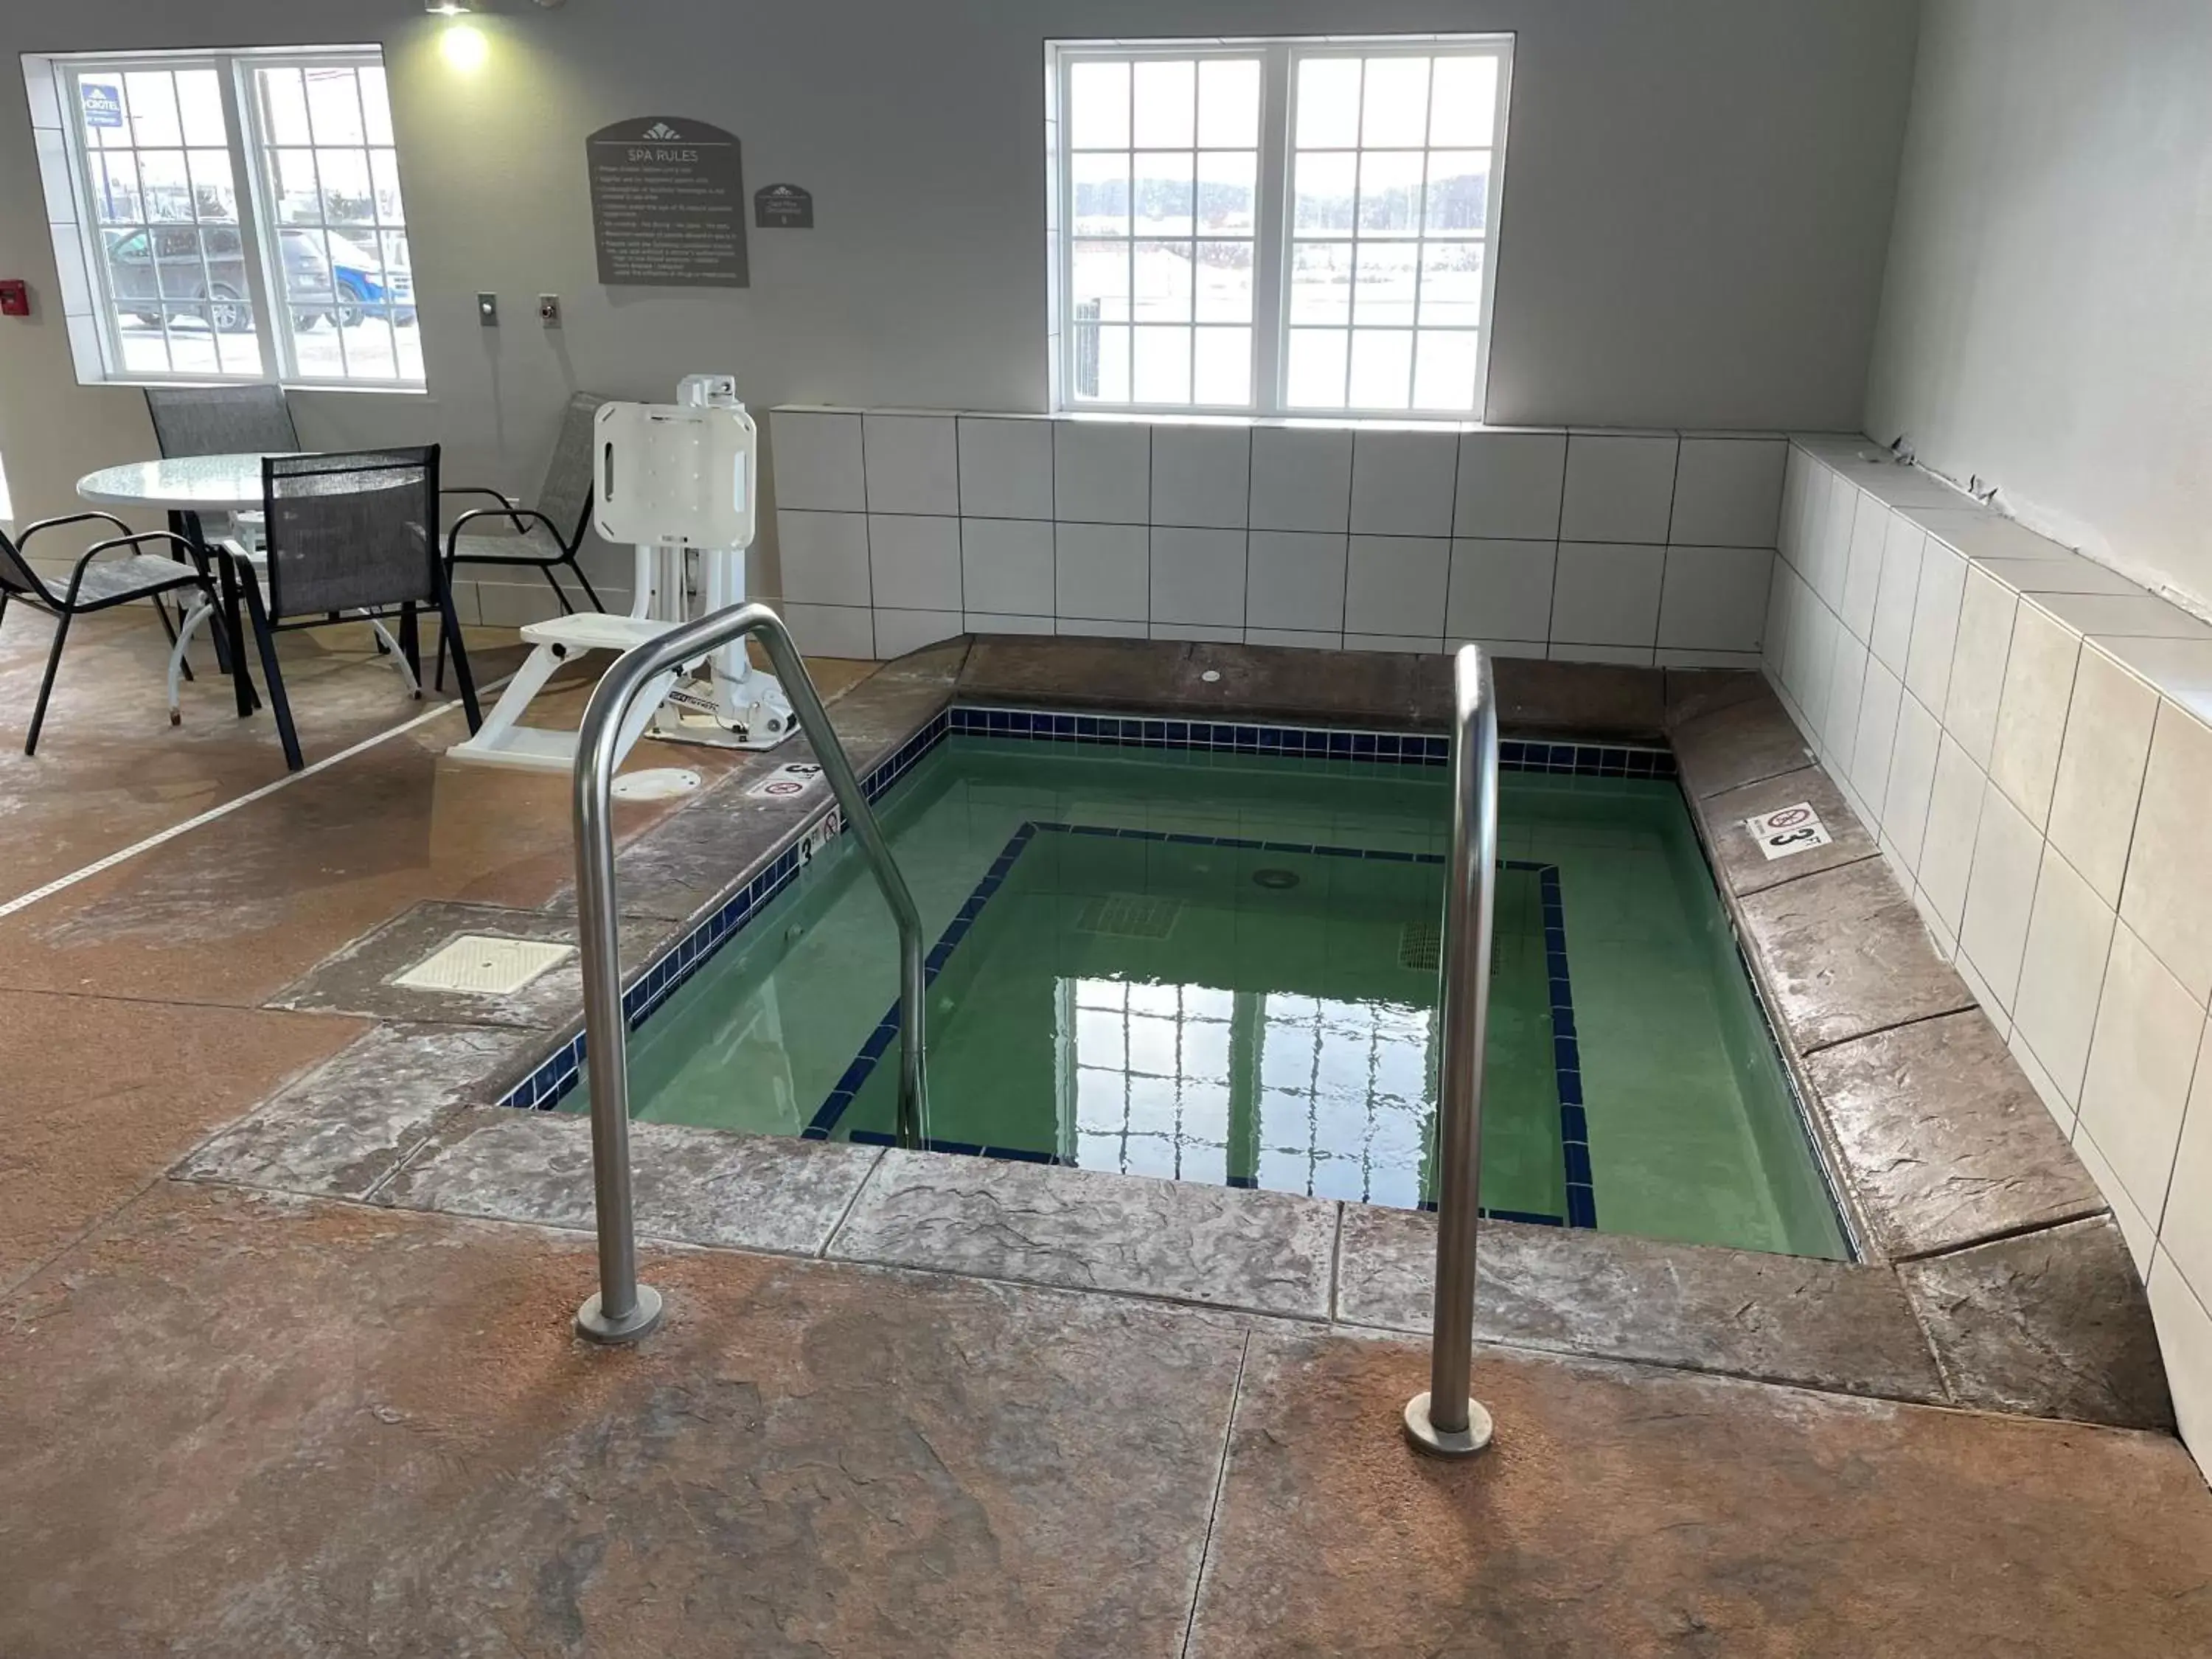 Swimming Pool in Microtel Inn & Suites by Wyndham Rochester South Mayo Clinic